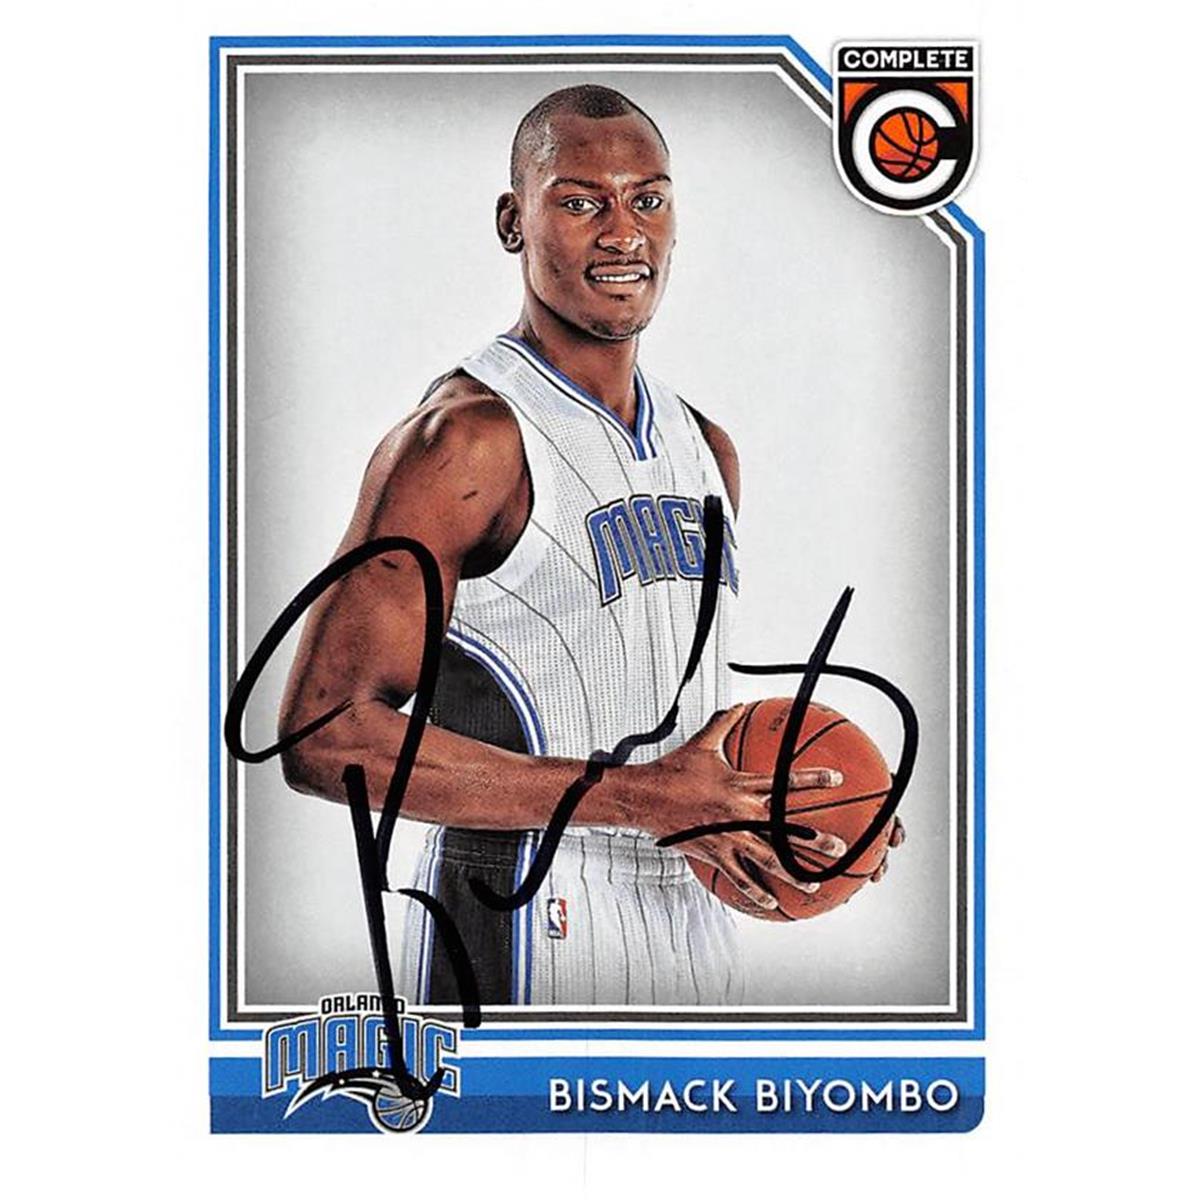 Picture of Autograph Warehouse 444532 Orlando Magic 2016 Panini Complete 183 Bismack Biyombo Autographed Basketball Card